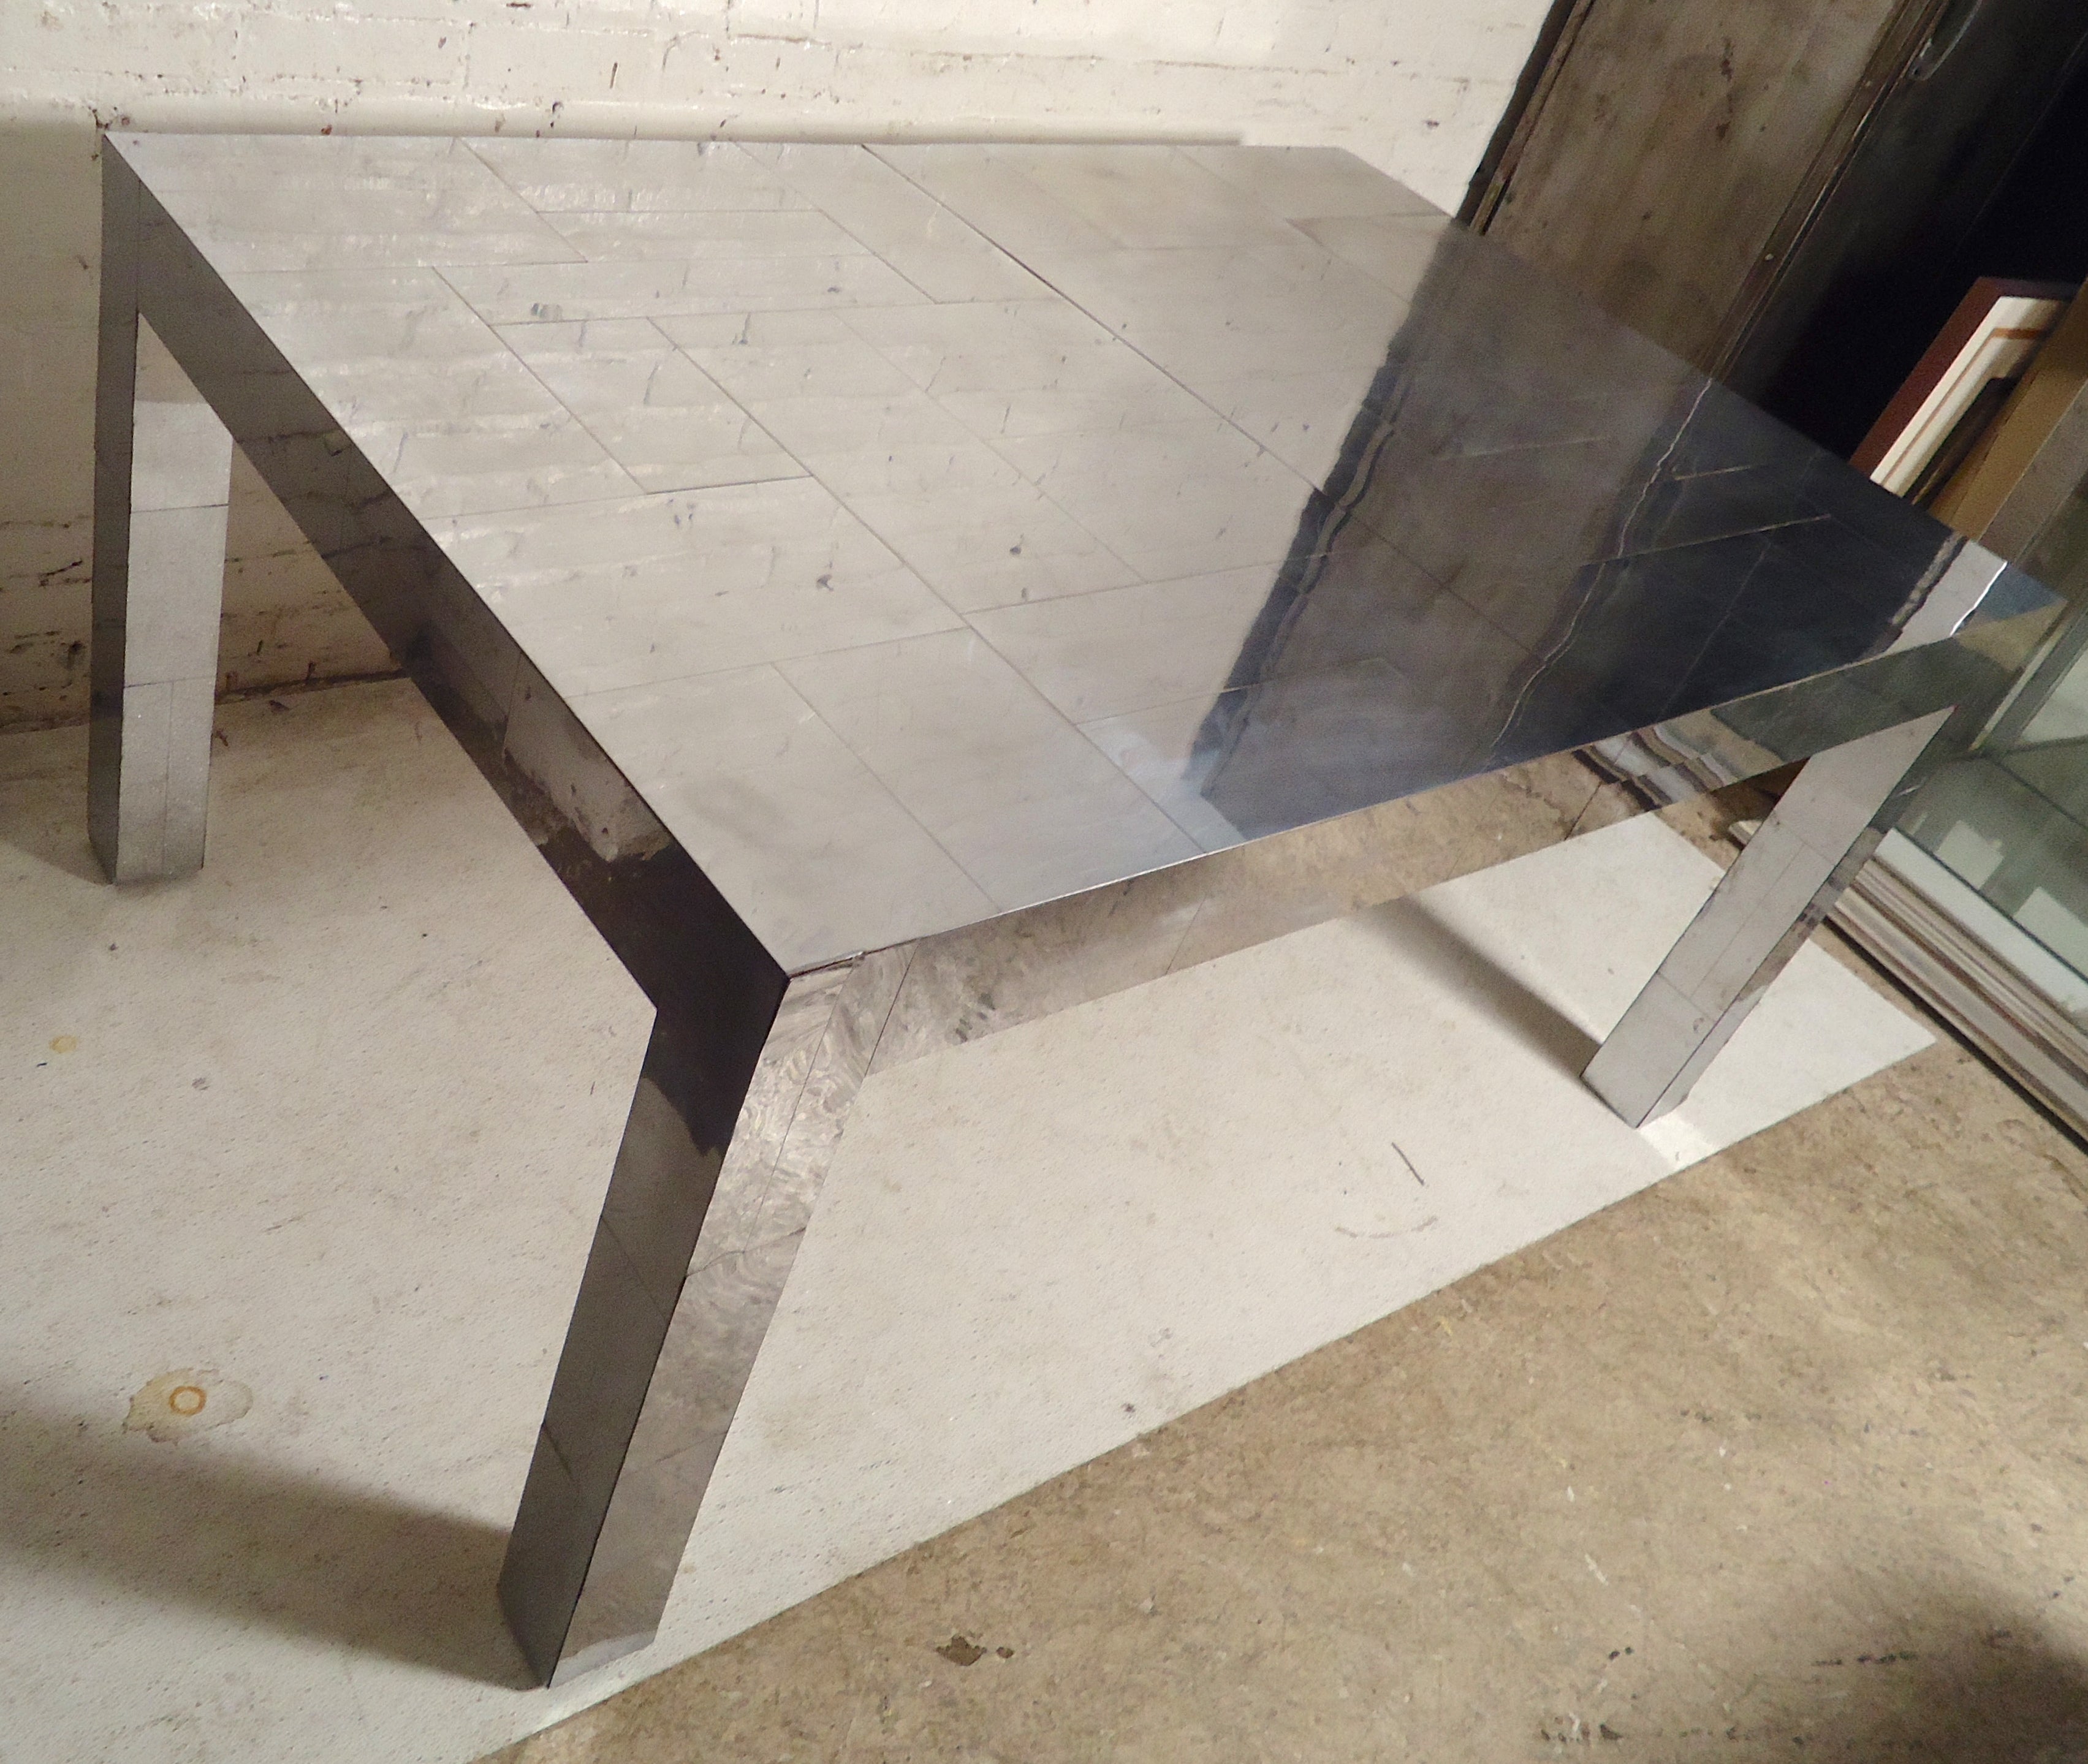 Polished chrome patchwork table by Paul Evans for his Cityscape line. Comes with a 15